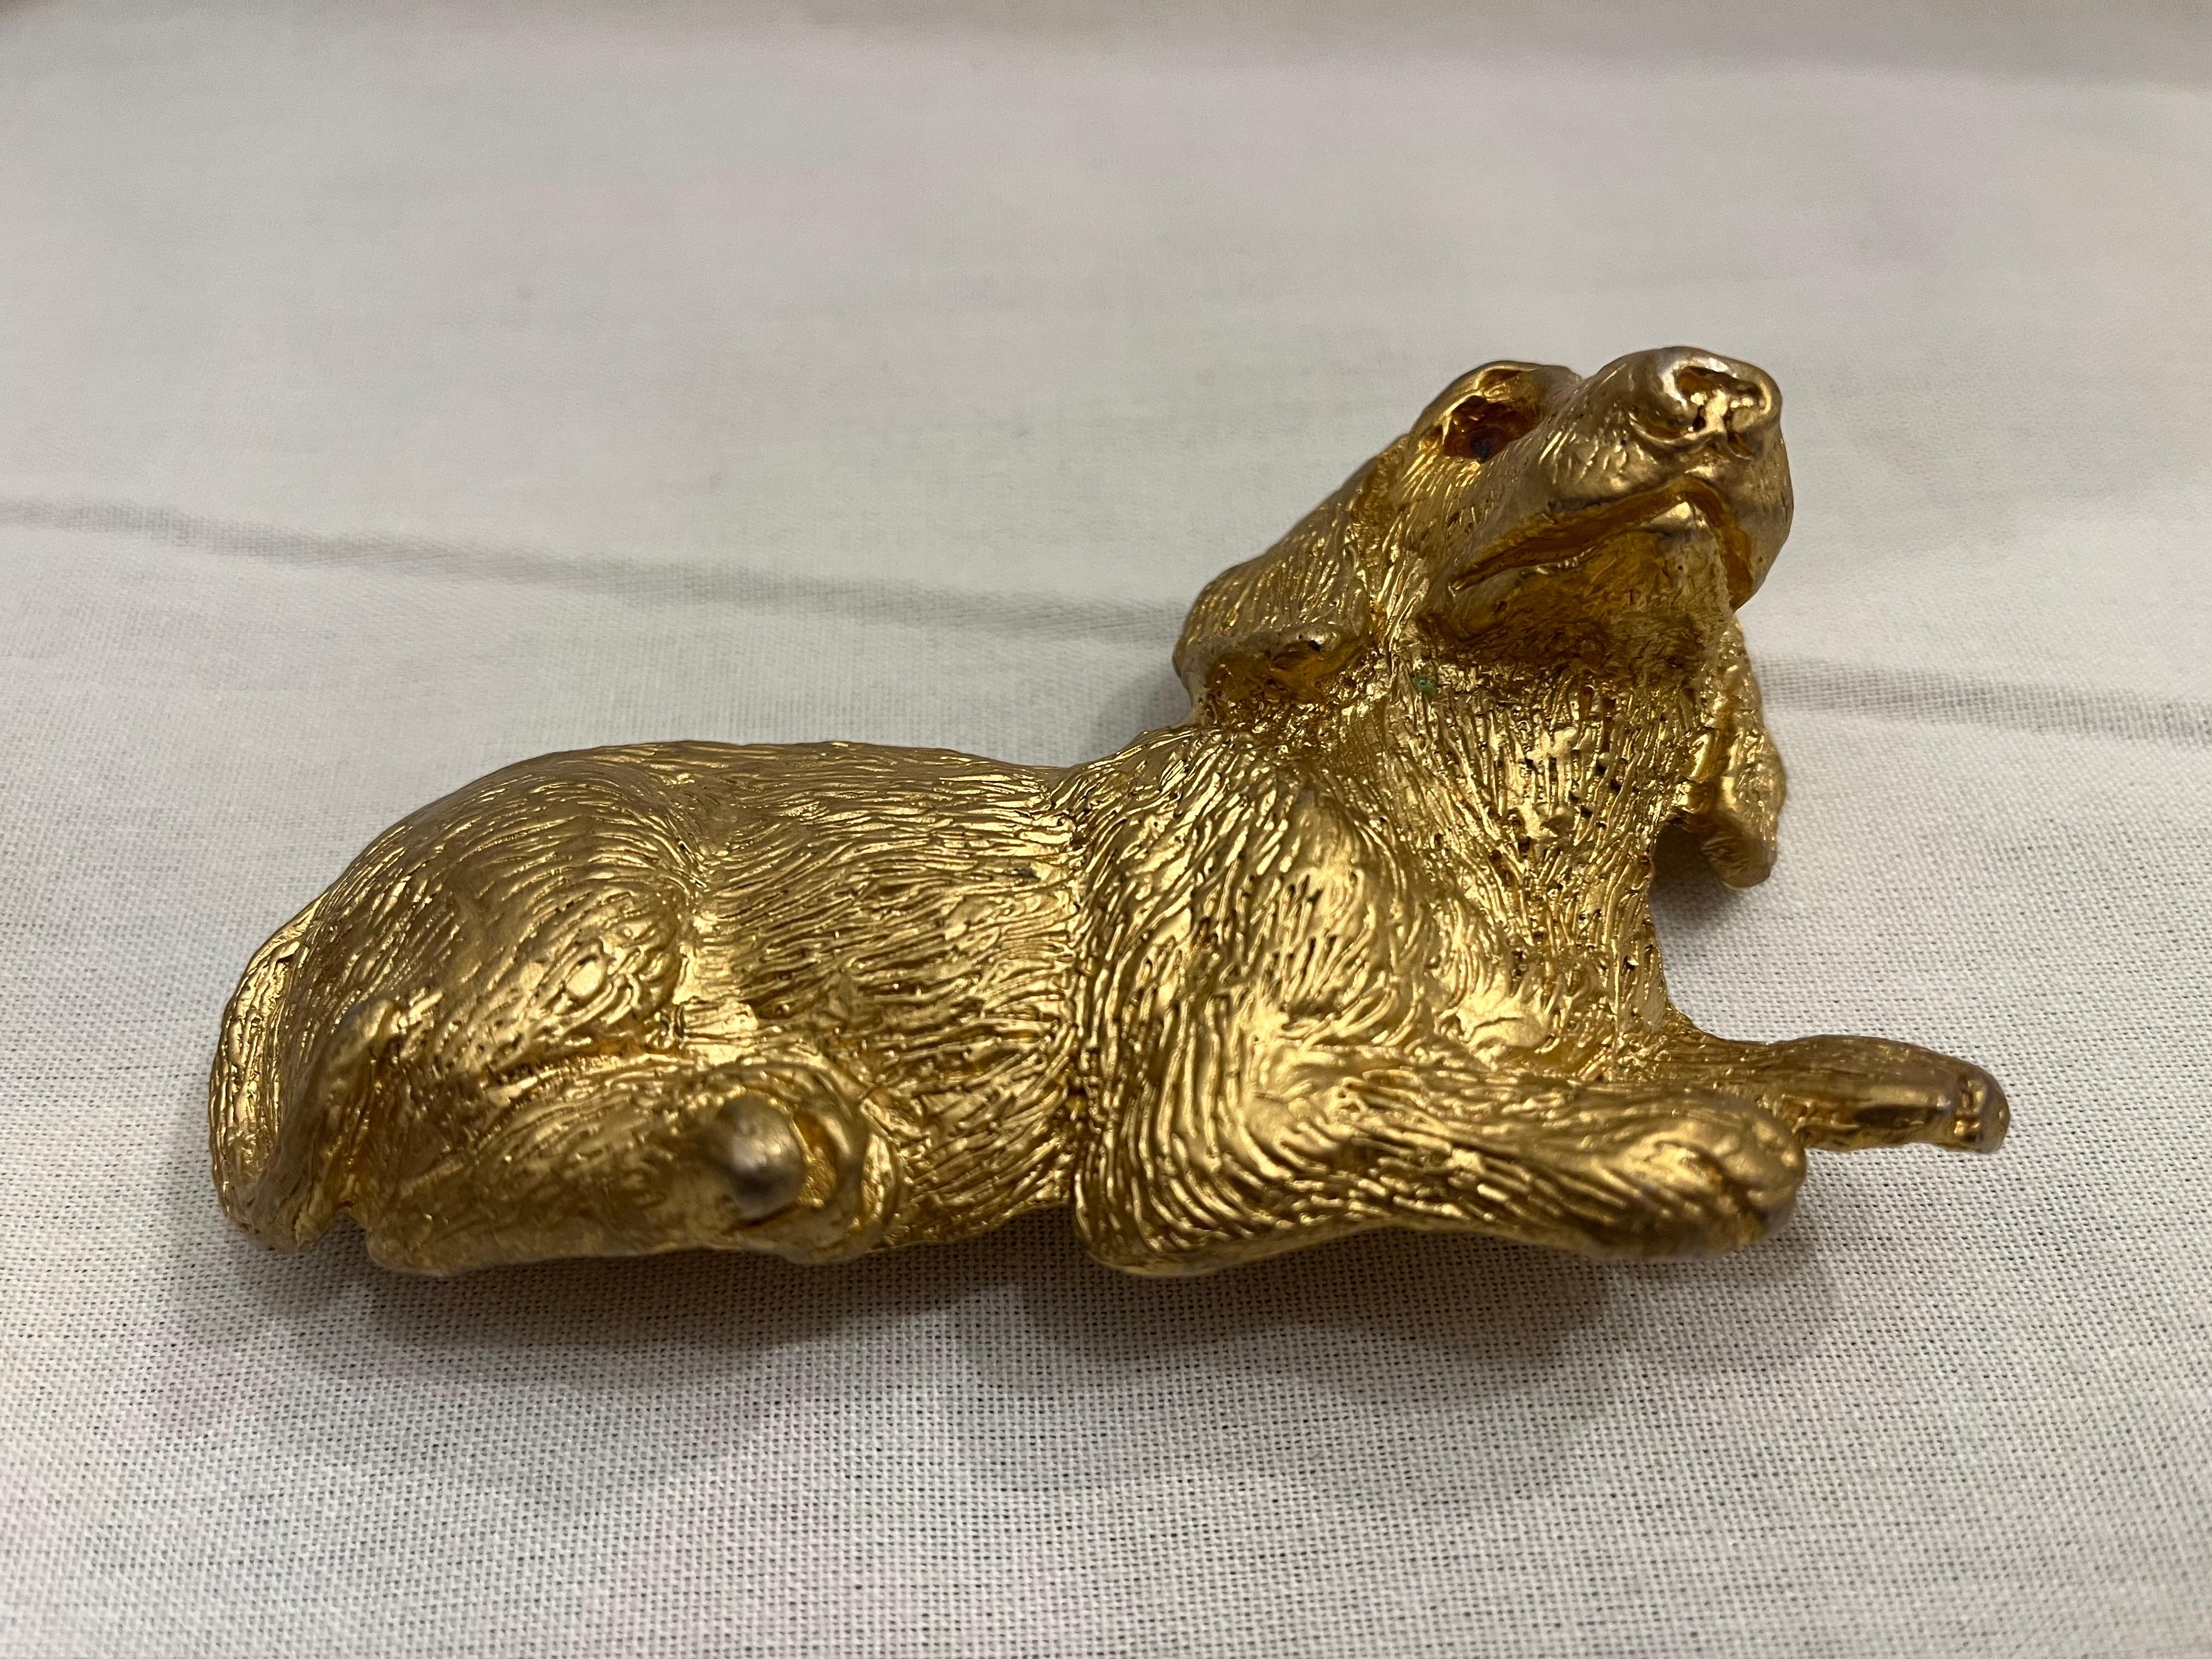 Vintage 1992 Mimi Di Niscemi Signed Golden Dachshund Belt Buckle with Brown Eyes For Sale 2